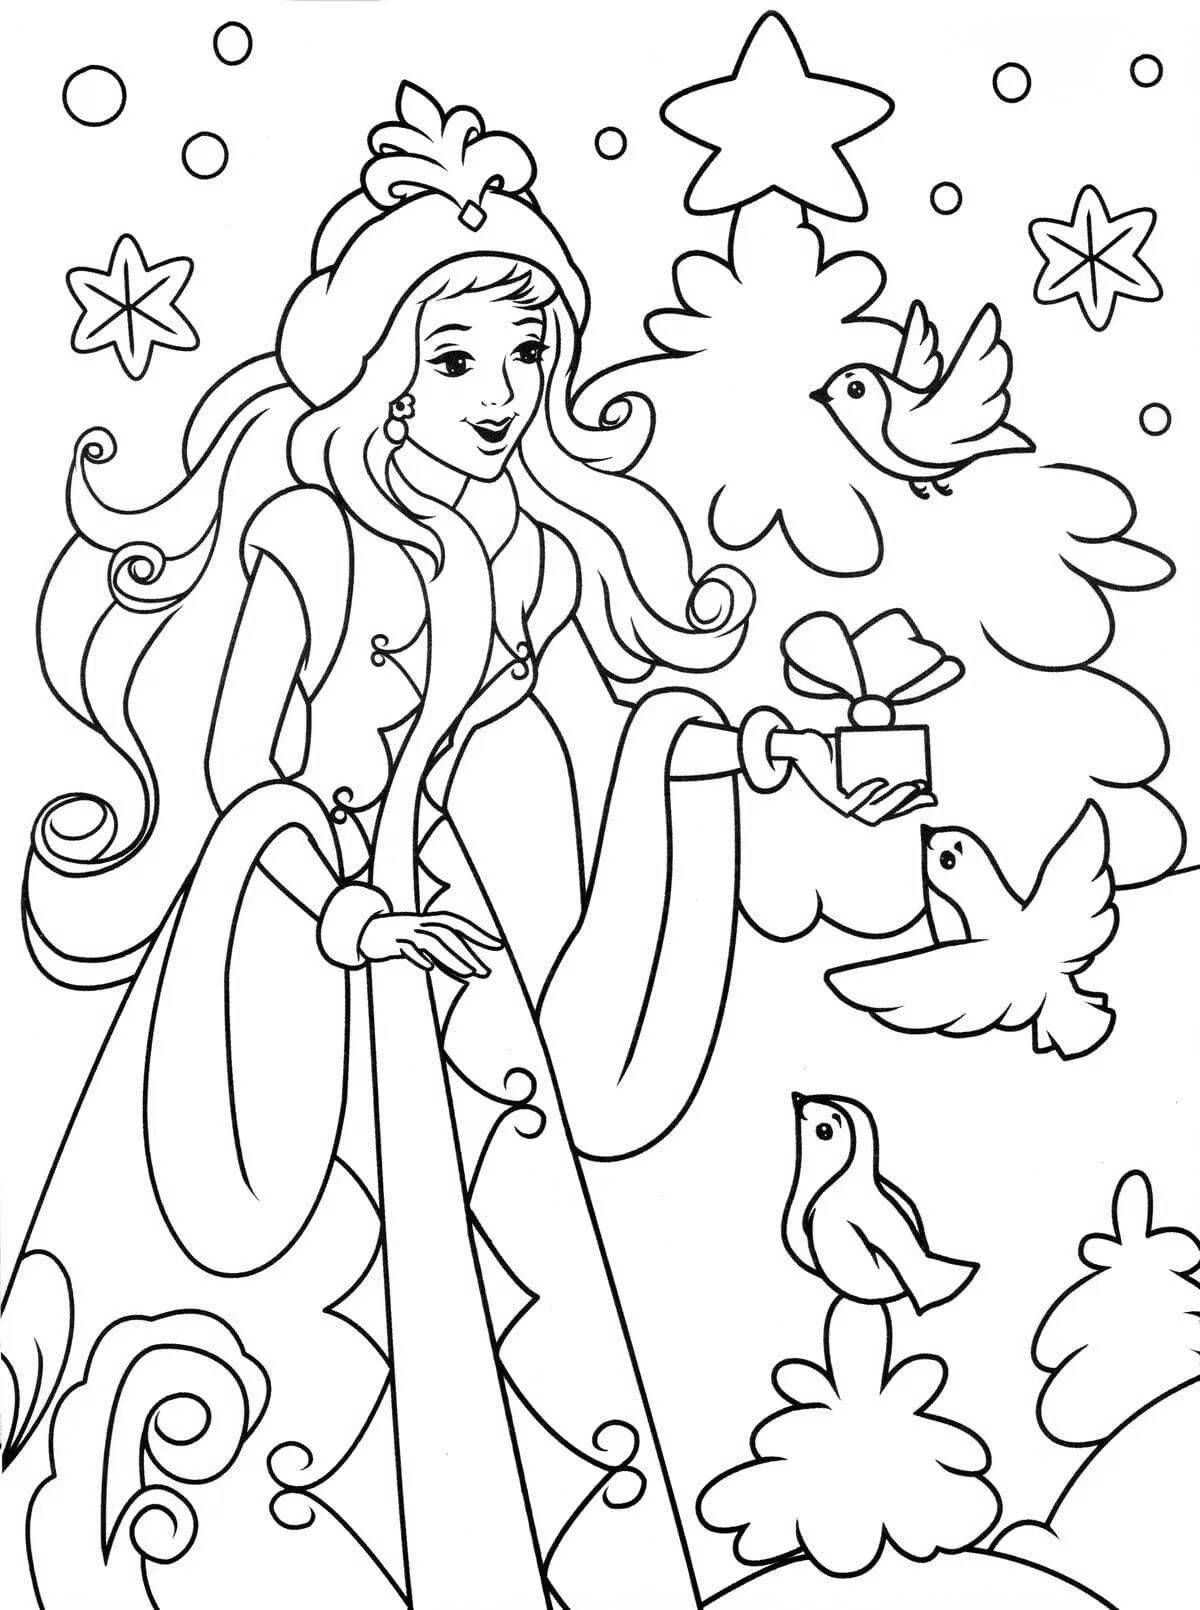 Anniversary Christmas coloring book for girls